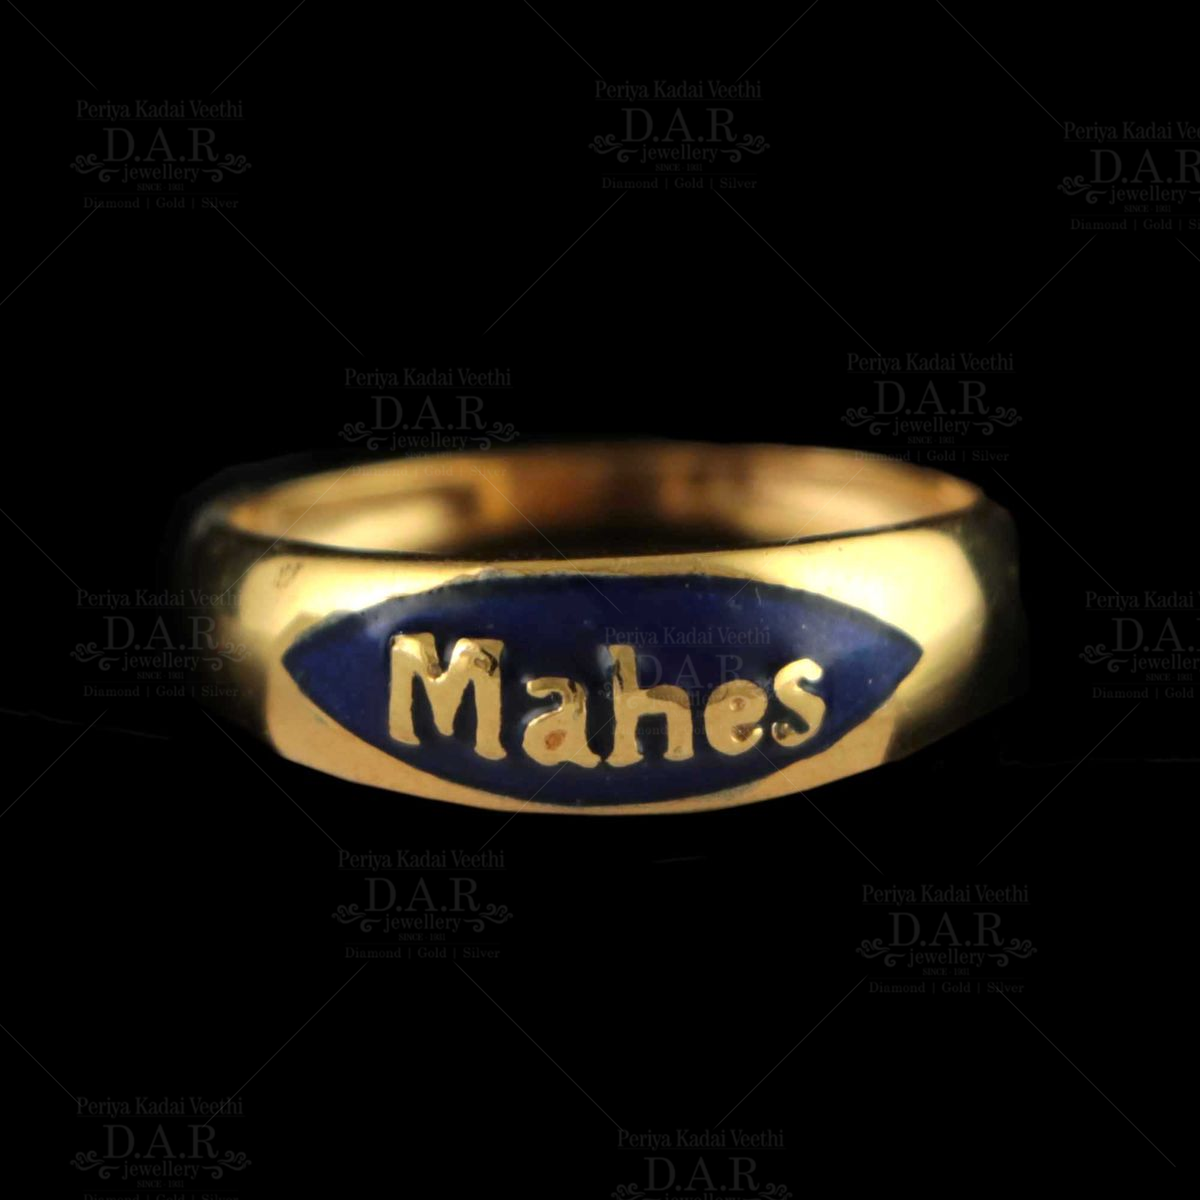 Personalized Name Ring 14K Yellow Gold | TheNetJeweler